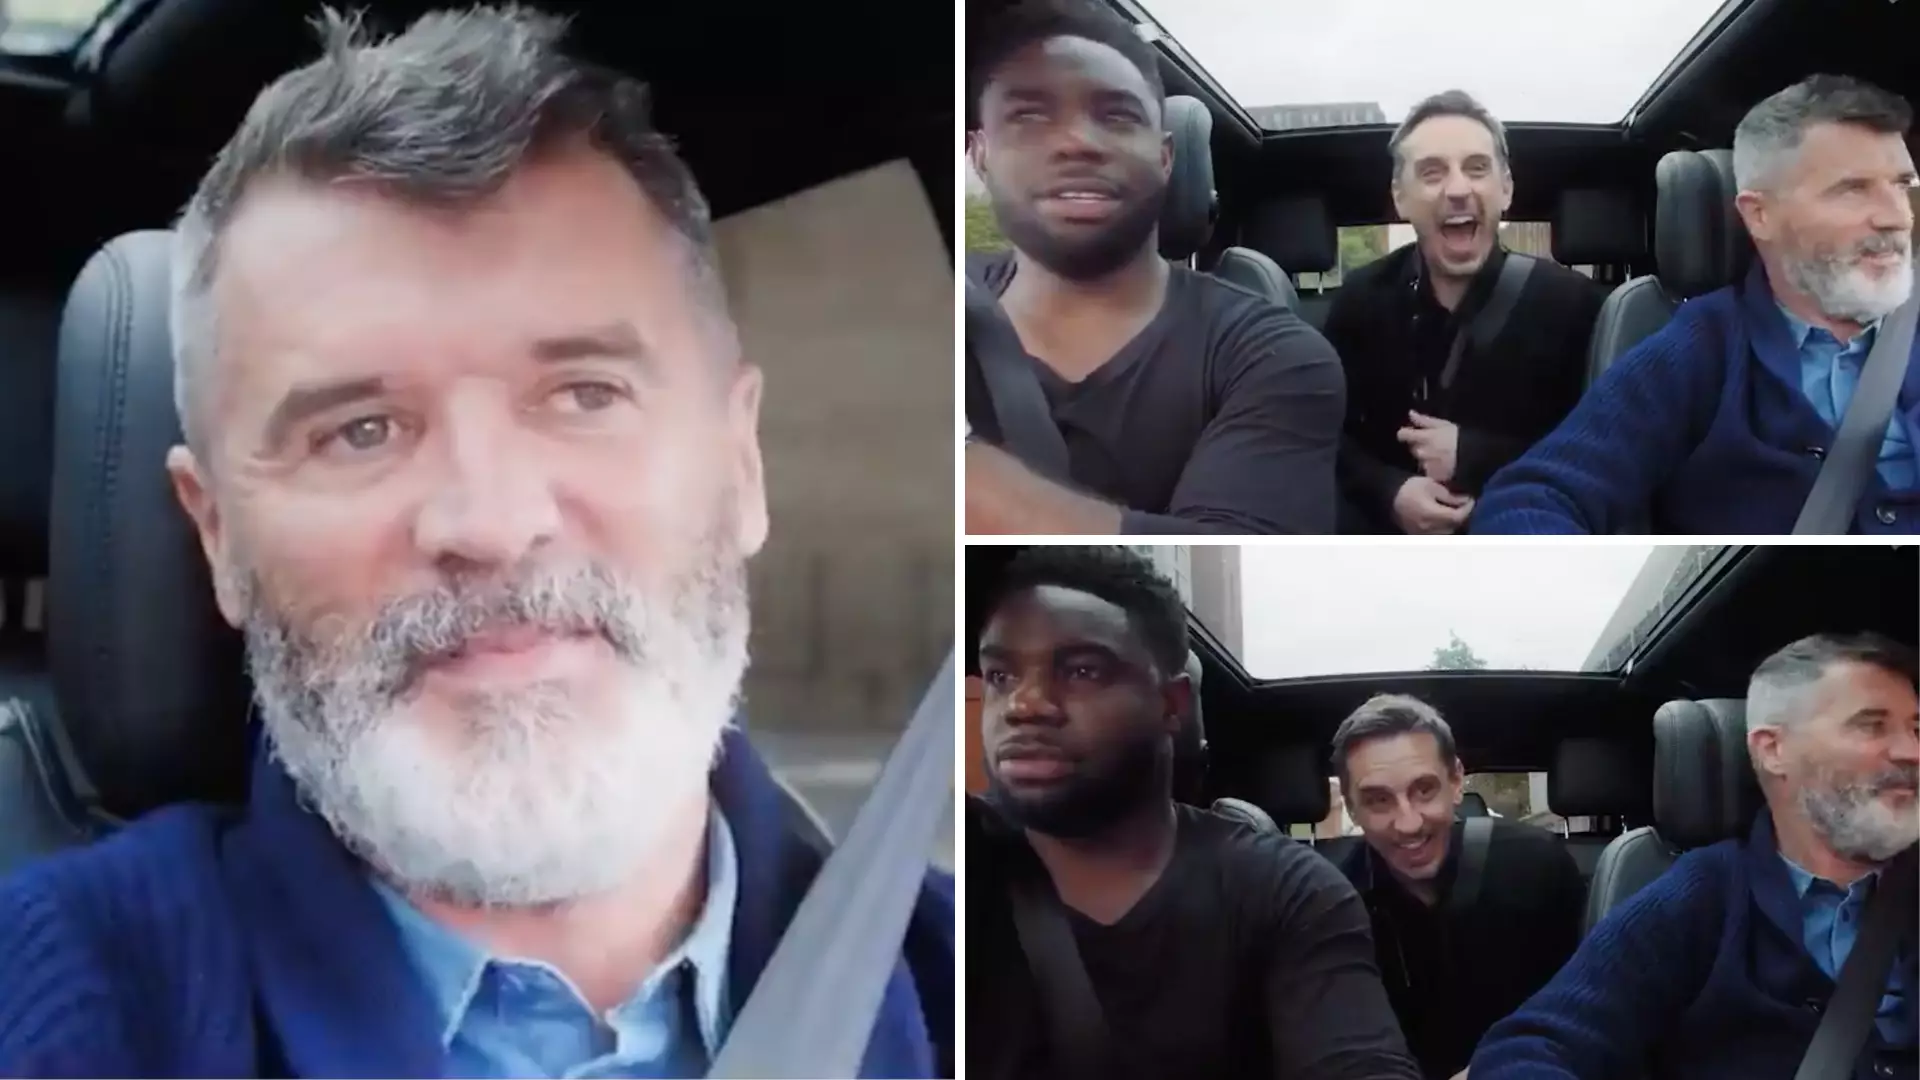 Roy Keane And Micah Richards Joined By Special Guest Gary Neville In Latest Episode Of Wembley Road Trip